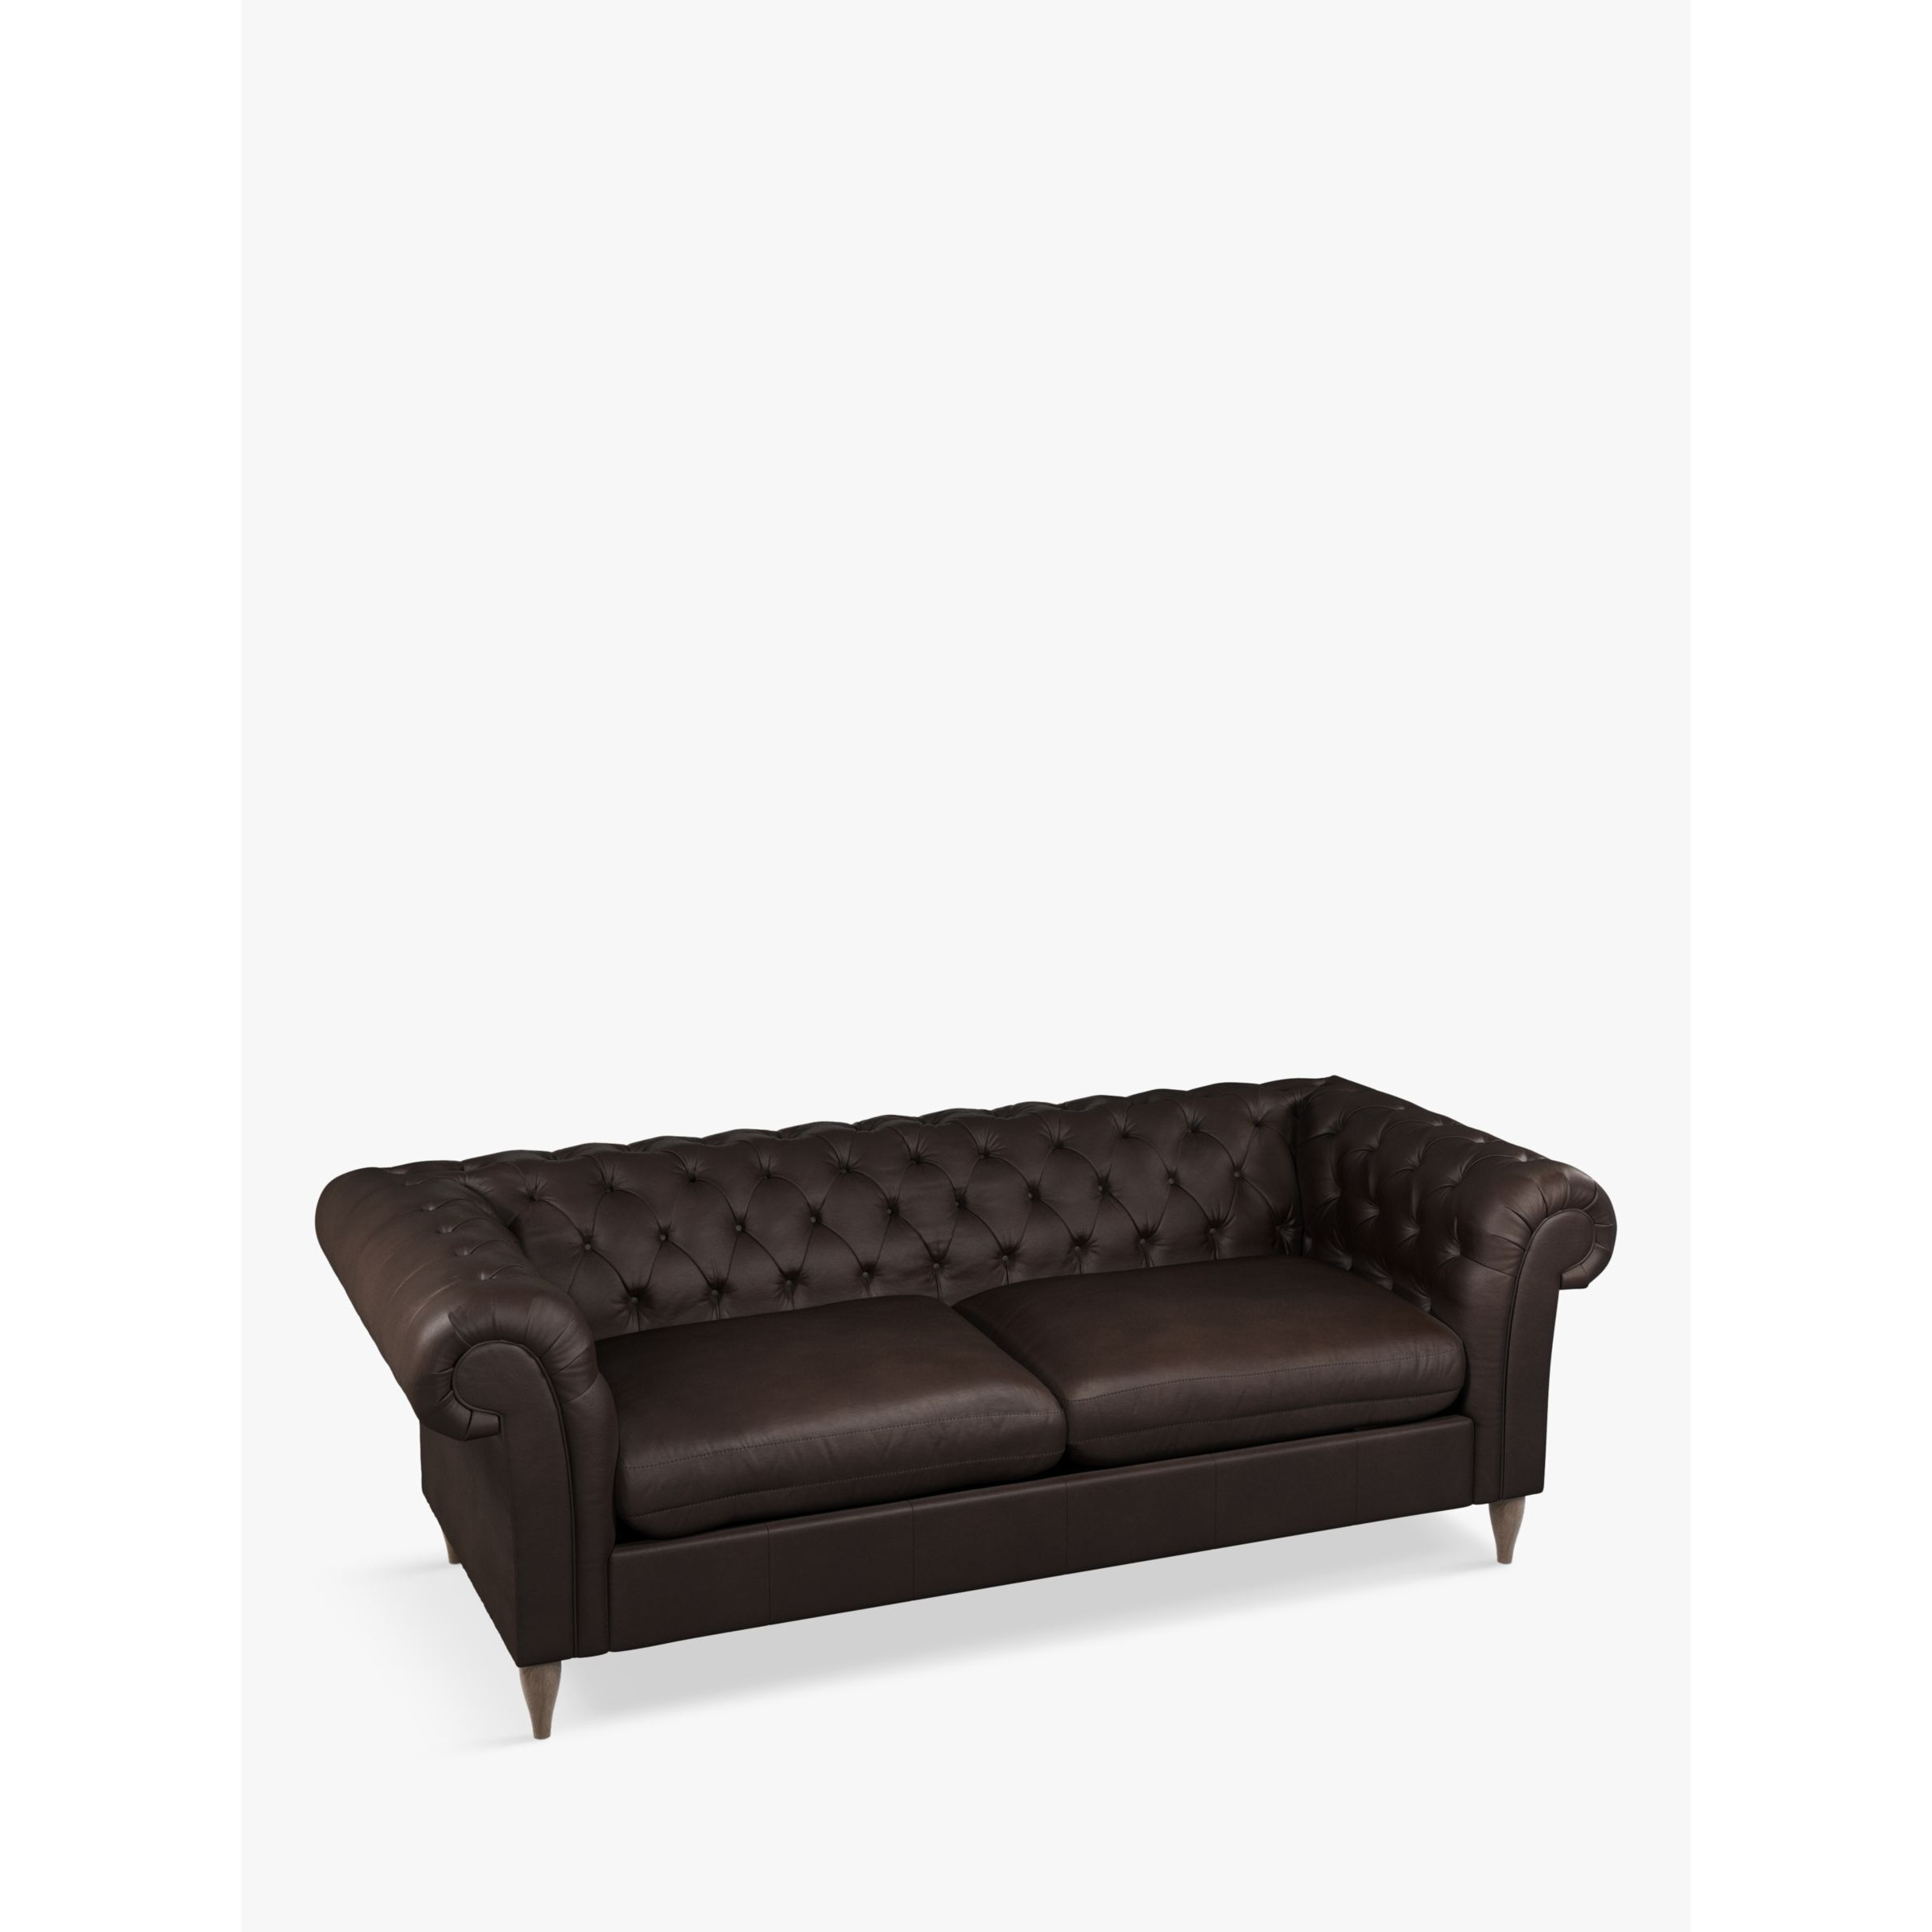 John Lewis Cromwell Chesterfield Double Leather Sofa Bed, Dark Leg - image 1